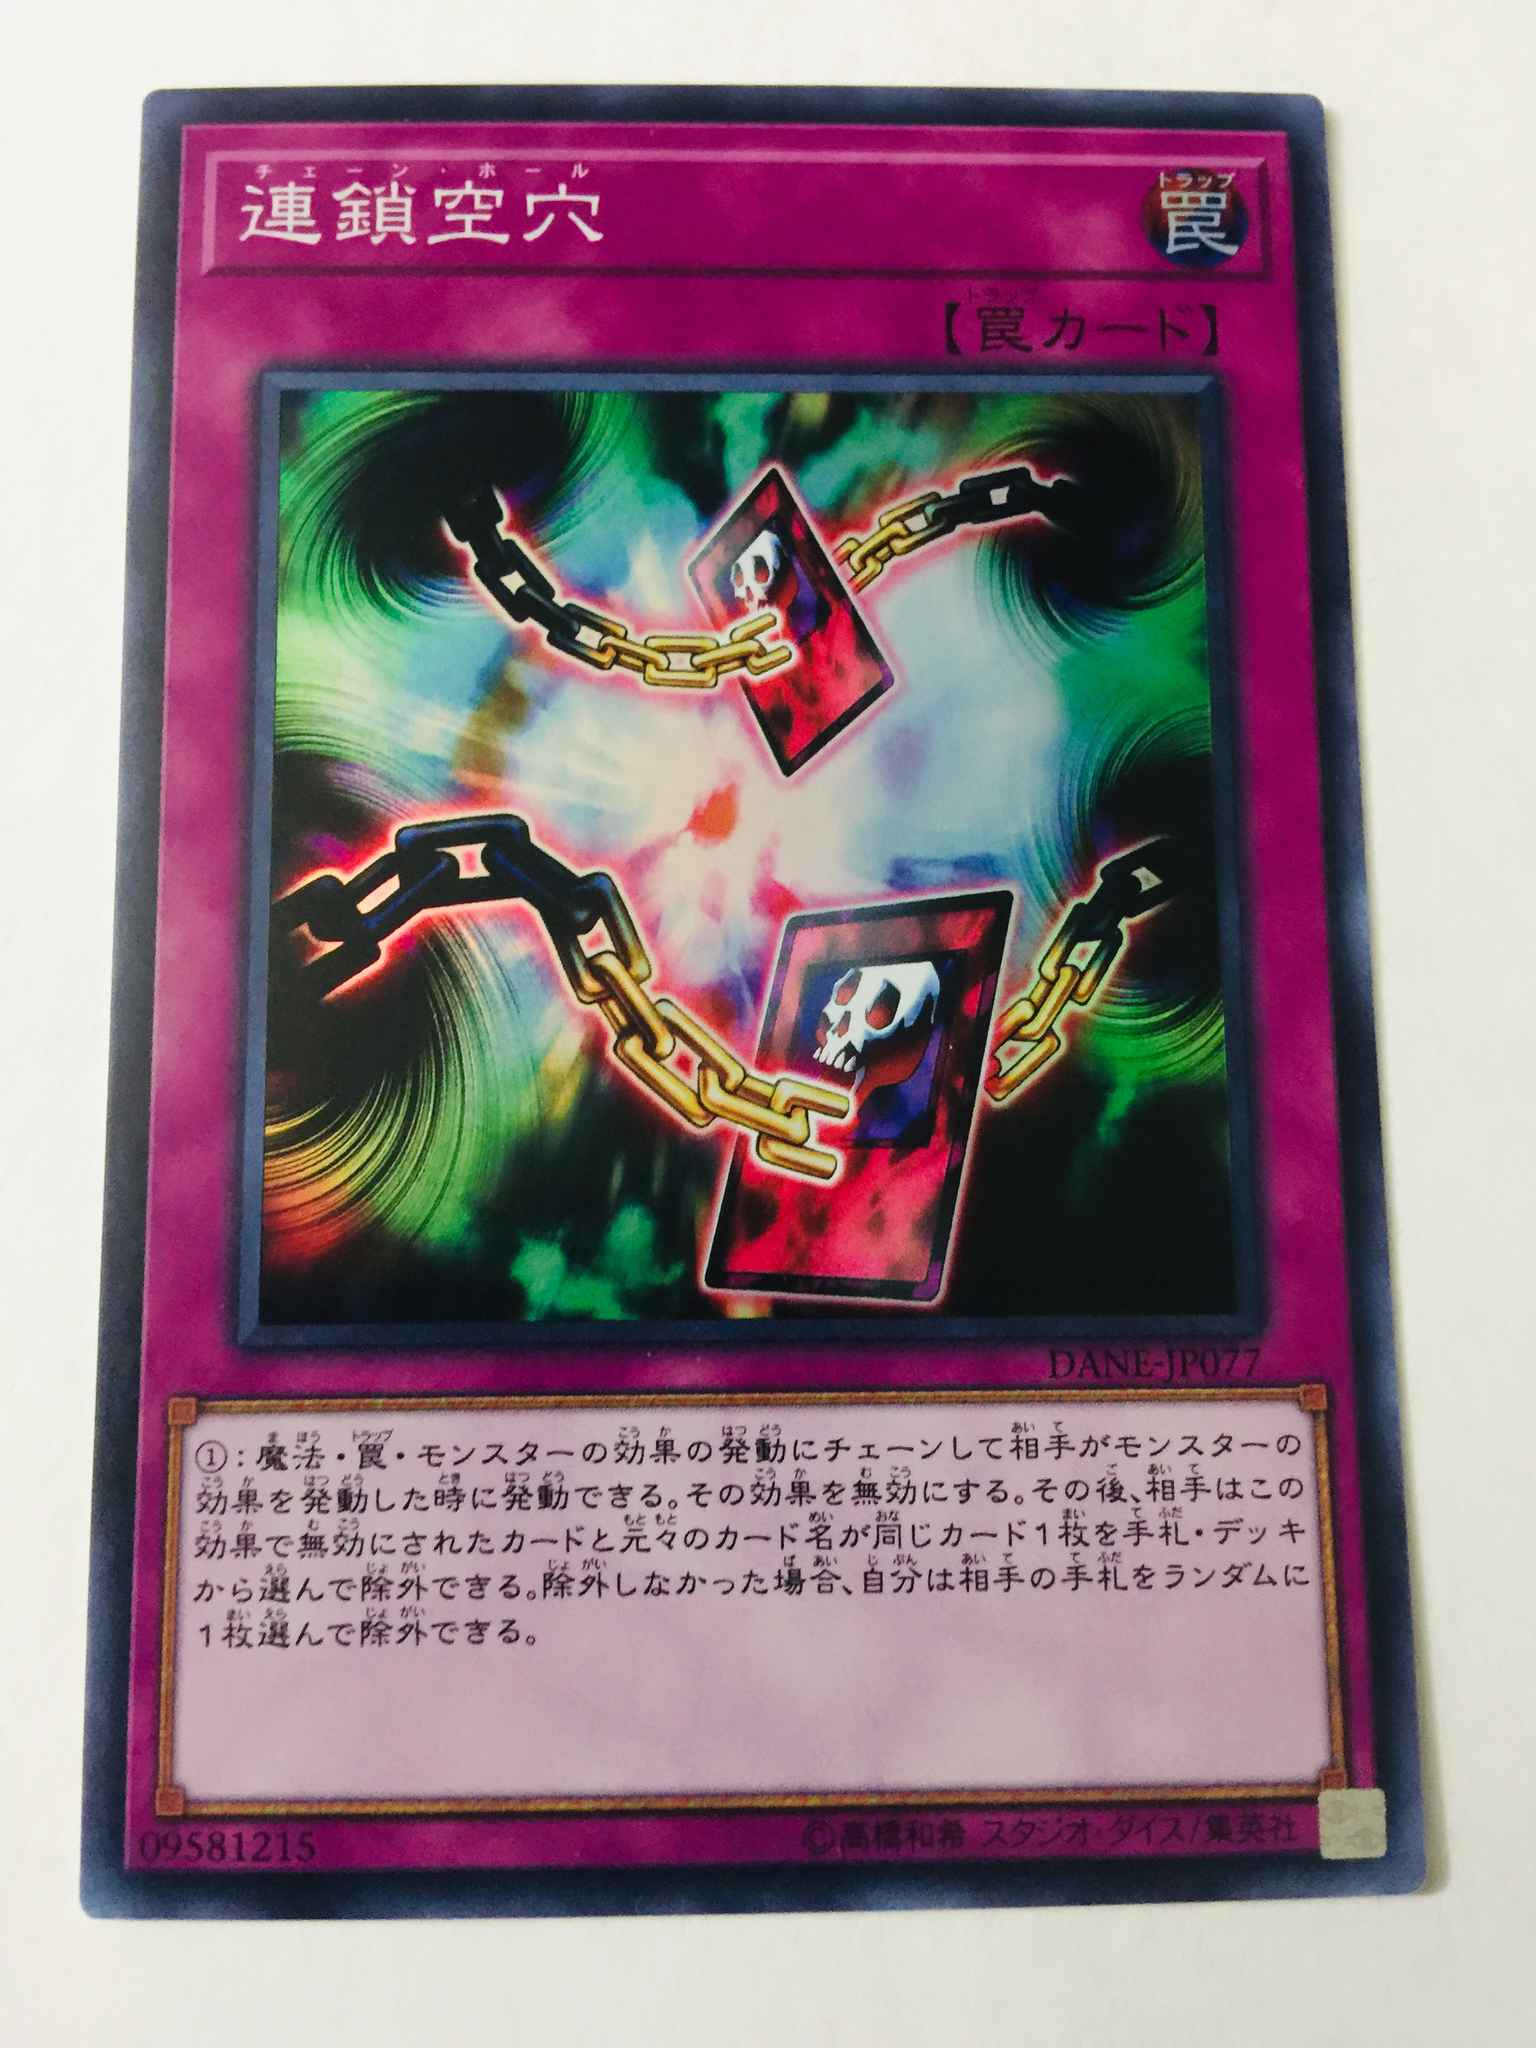 Japanese Chain Hole Dane Jp077 Super Rare Chain Hole Dark Neostorm Yugioh Online Gaming Store For Cards Miniatures Singles Packs Booster Boxes